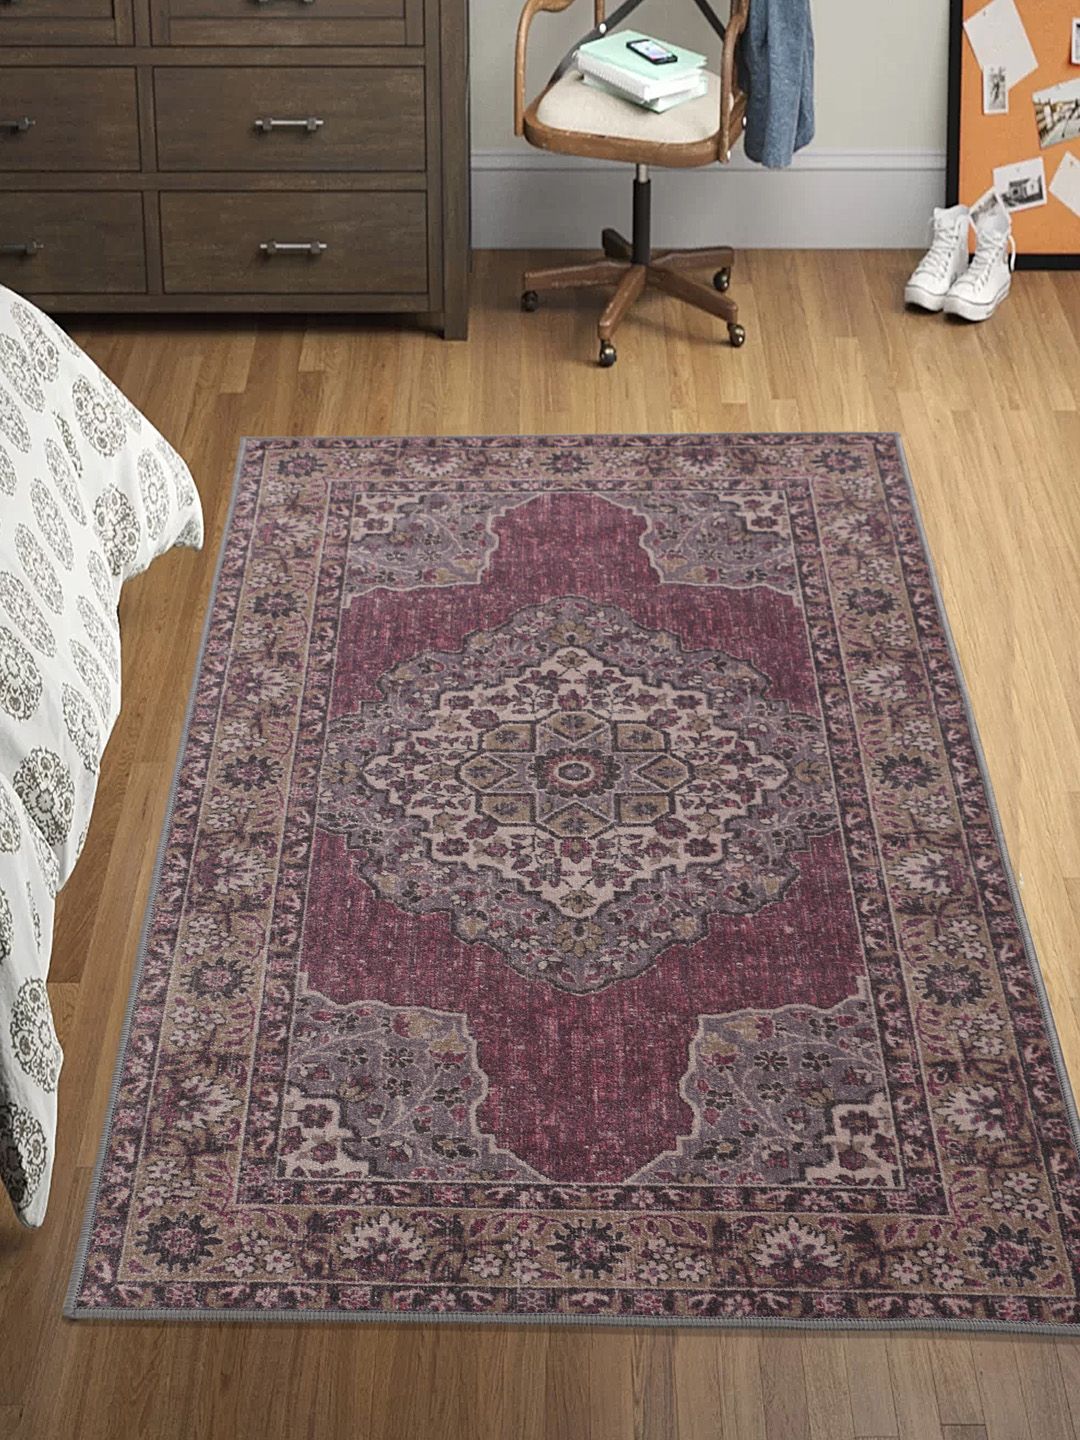 RUGSMITH Purple & Beige Patterned Anti-Skid Rectangle Carpet Price in India